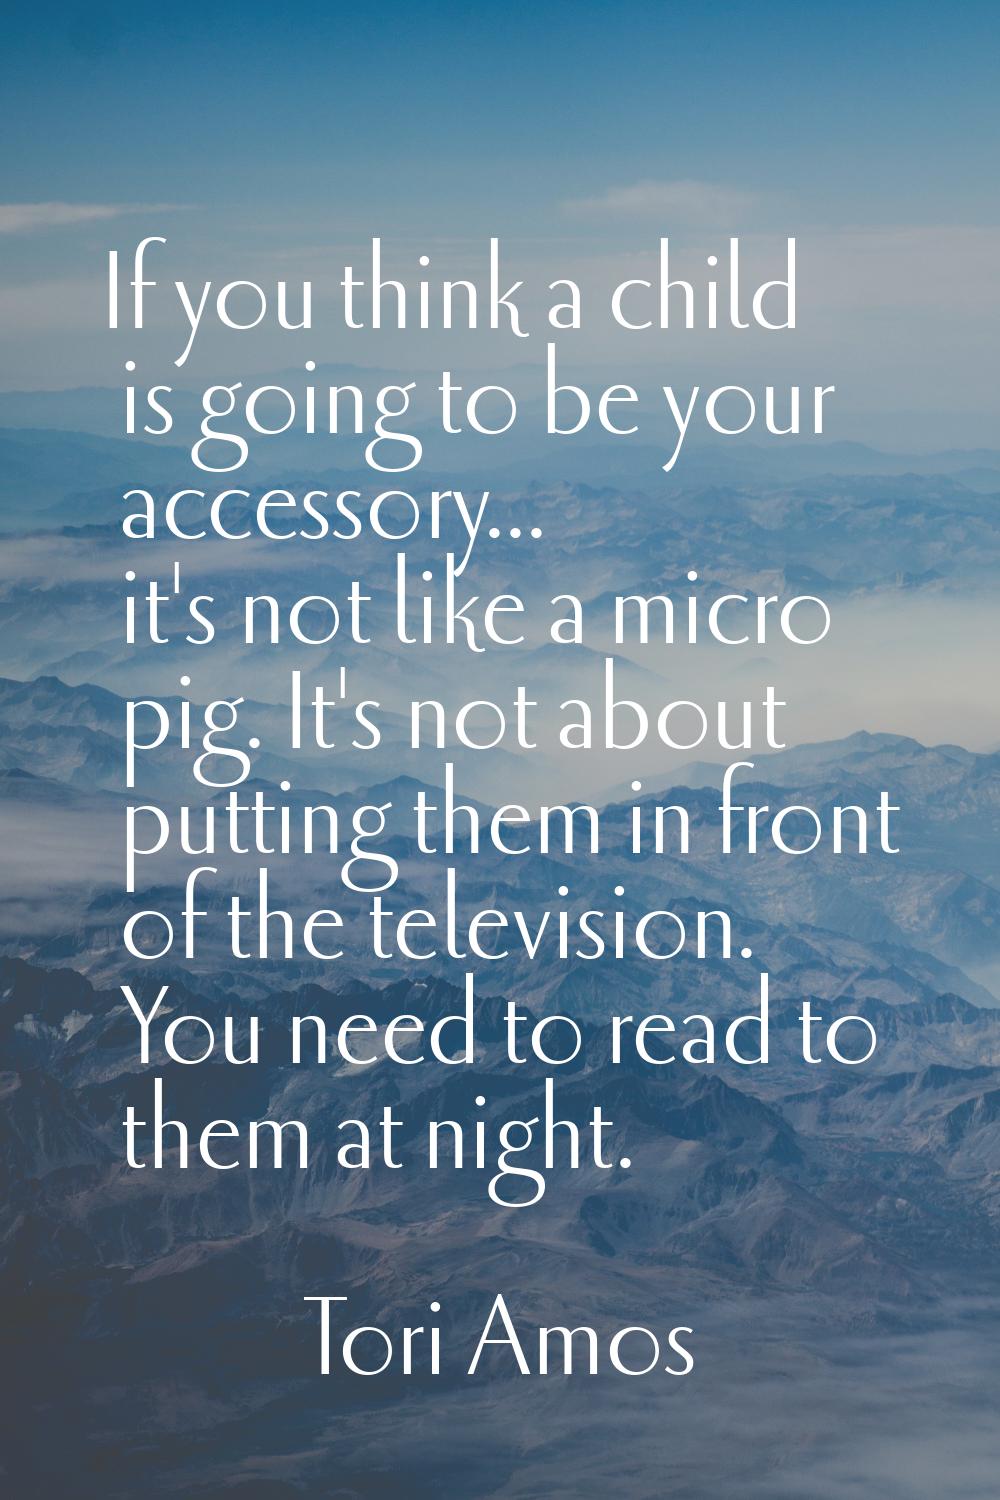 If you think a child is going to be your accessory... it's not like a micro pig. It's not about put